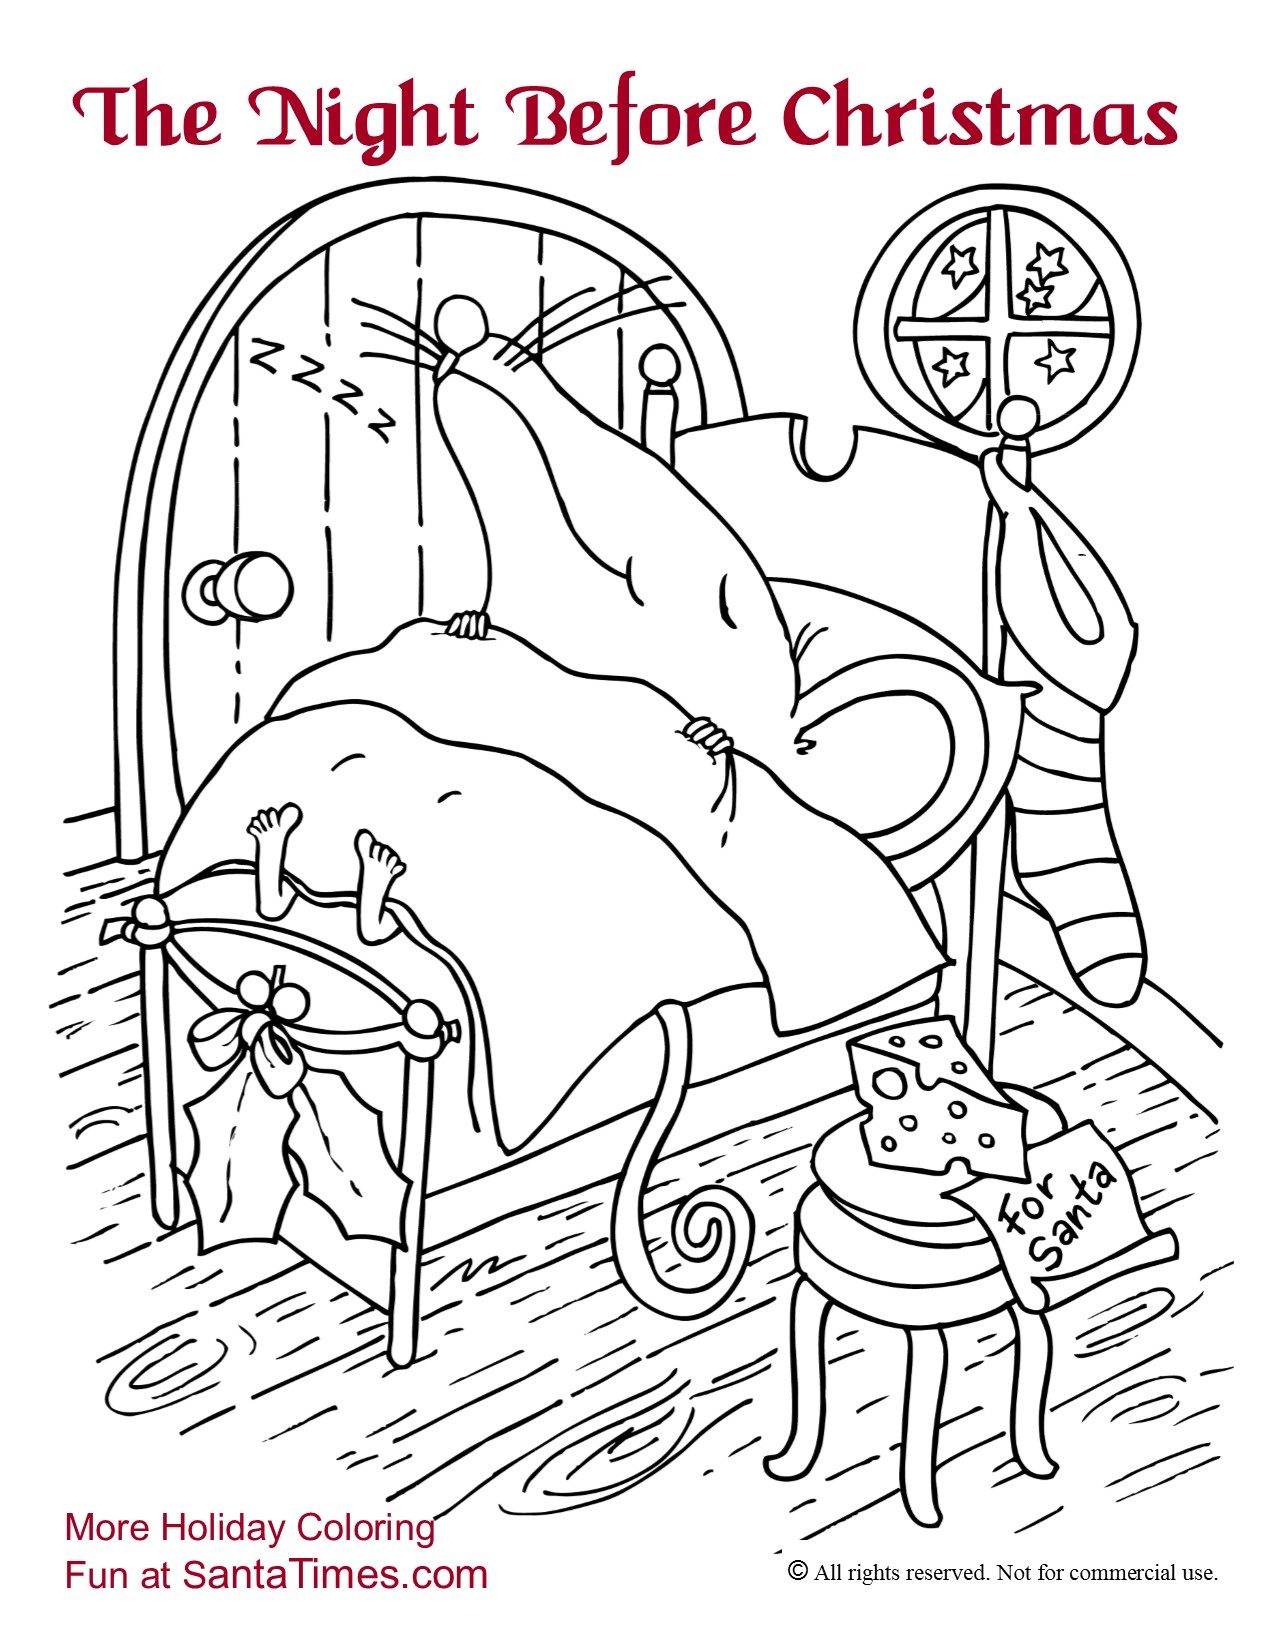 The Night Before Christmas Coloring Page printout